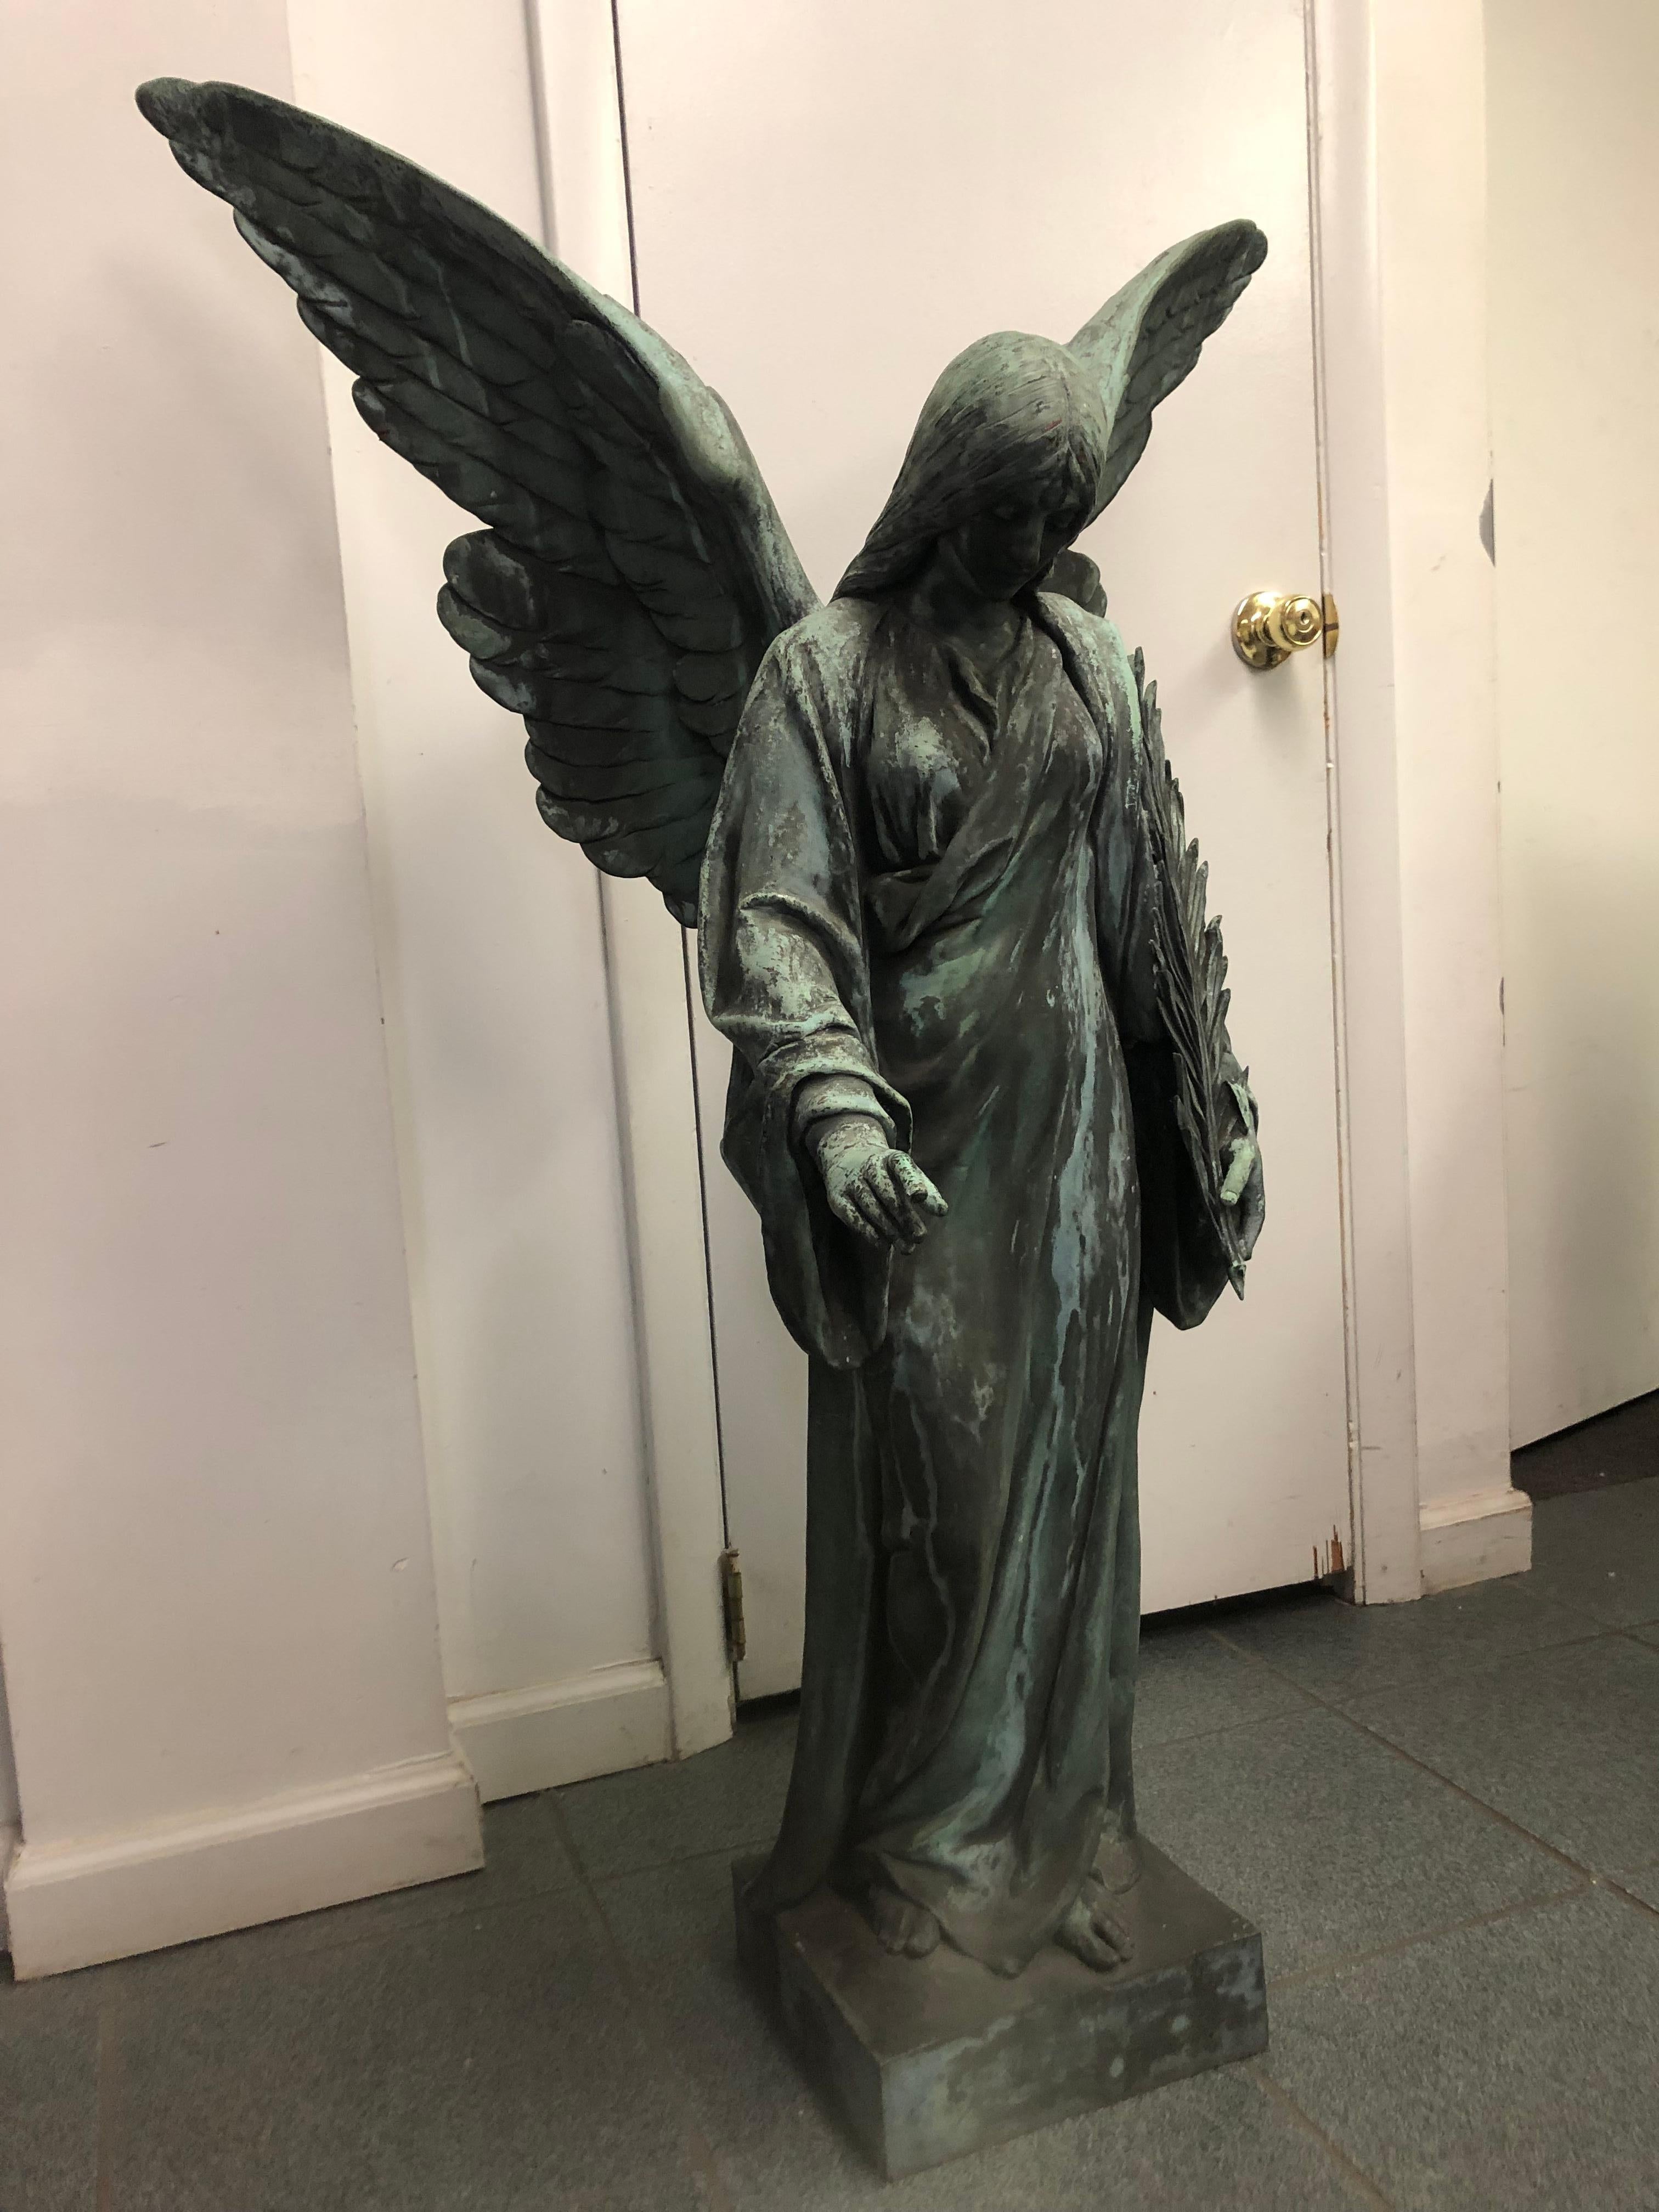 Late 19th century bronze finish over Copper Guarding or Praying Angel. This is a very beautiful piece with amazing details its hard to look away. Signed LEHNERT on the base of the statue its a very heavy copper statue with a bronze finish you would